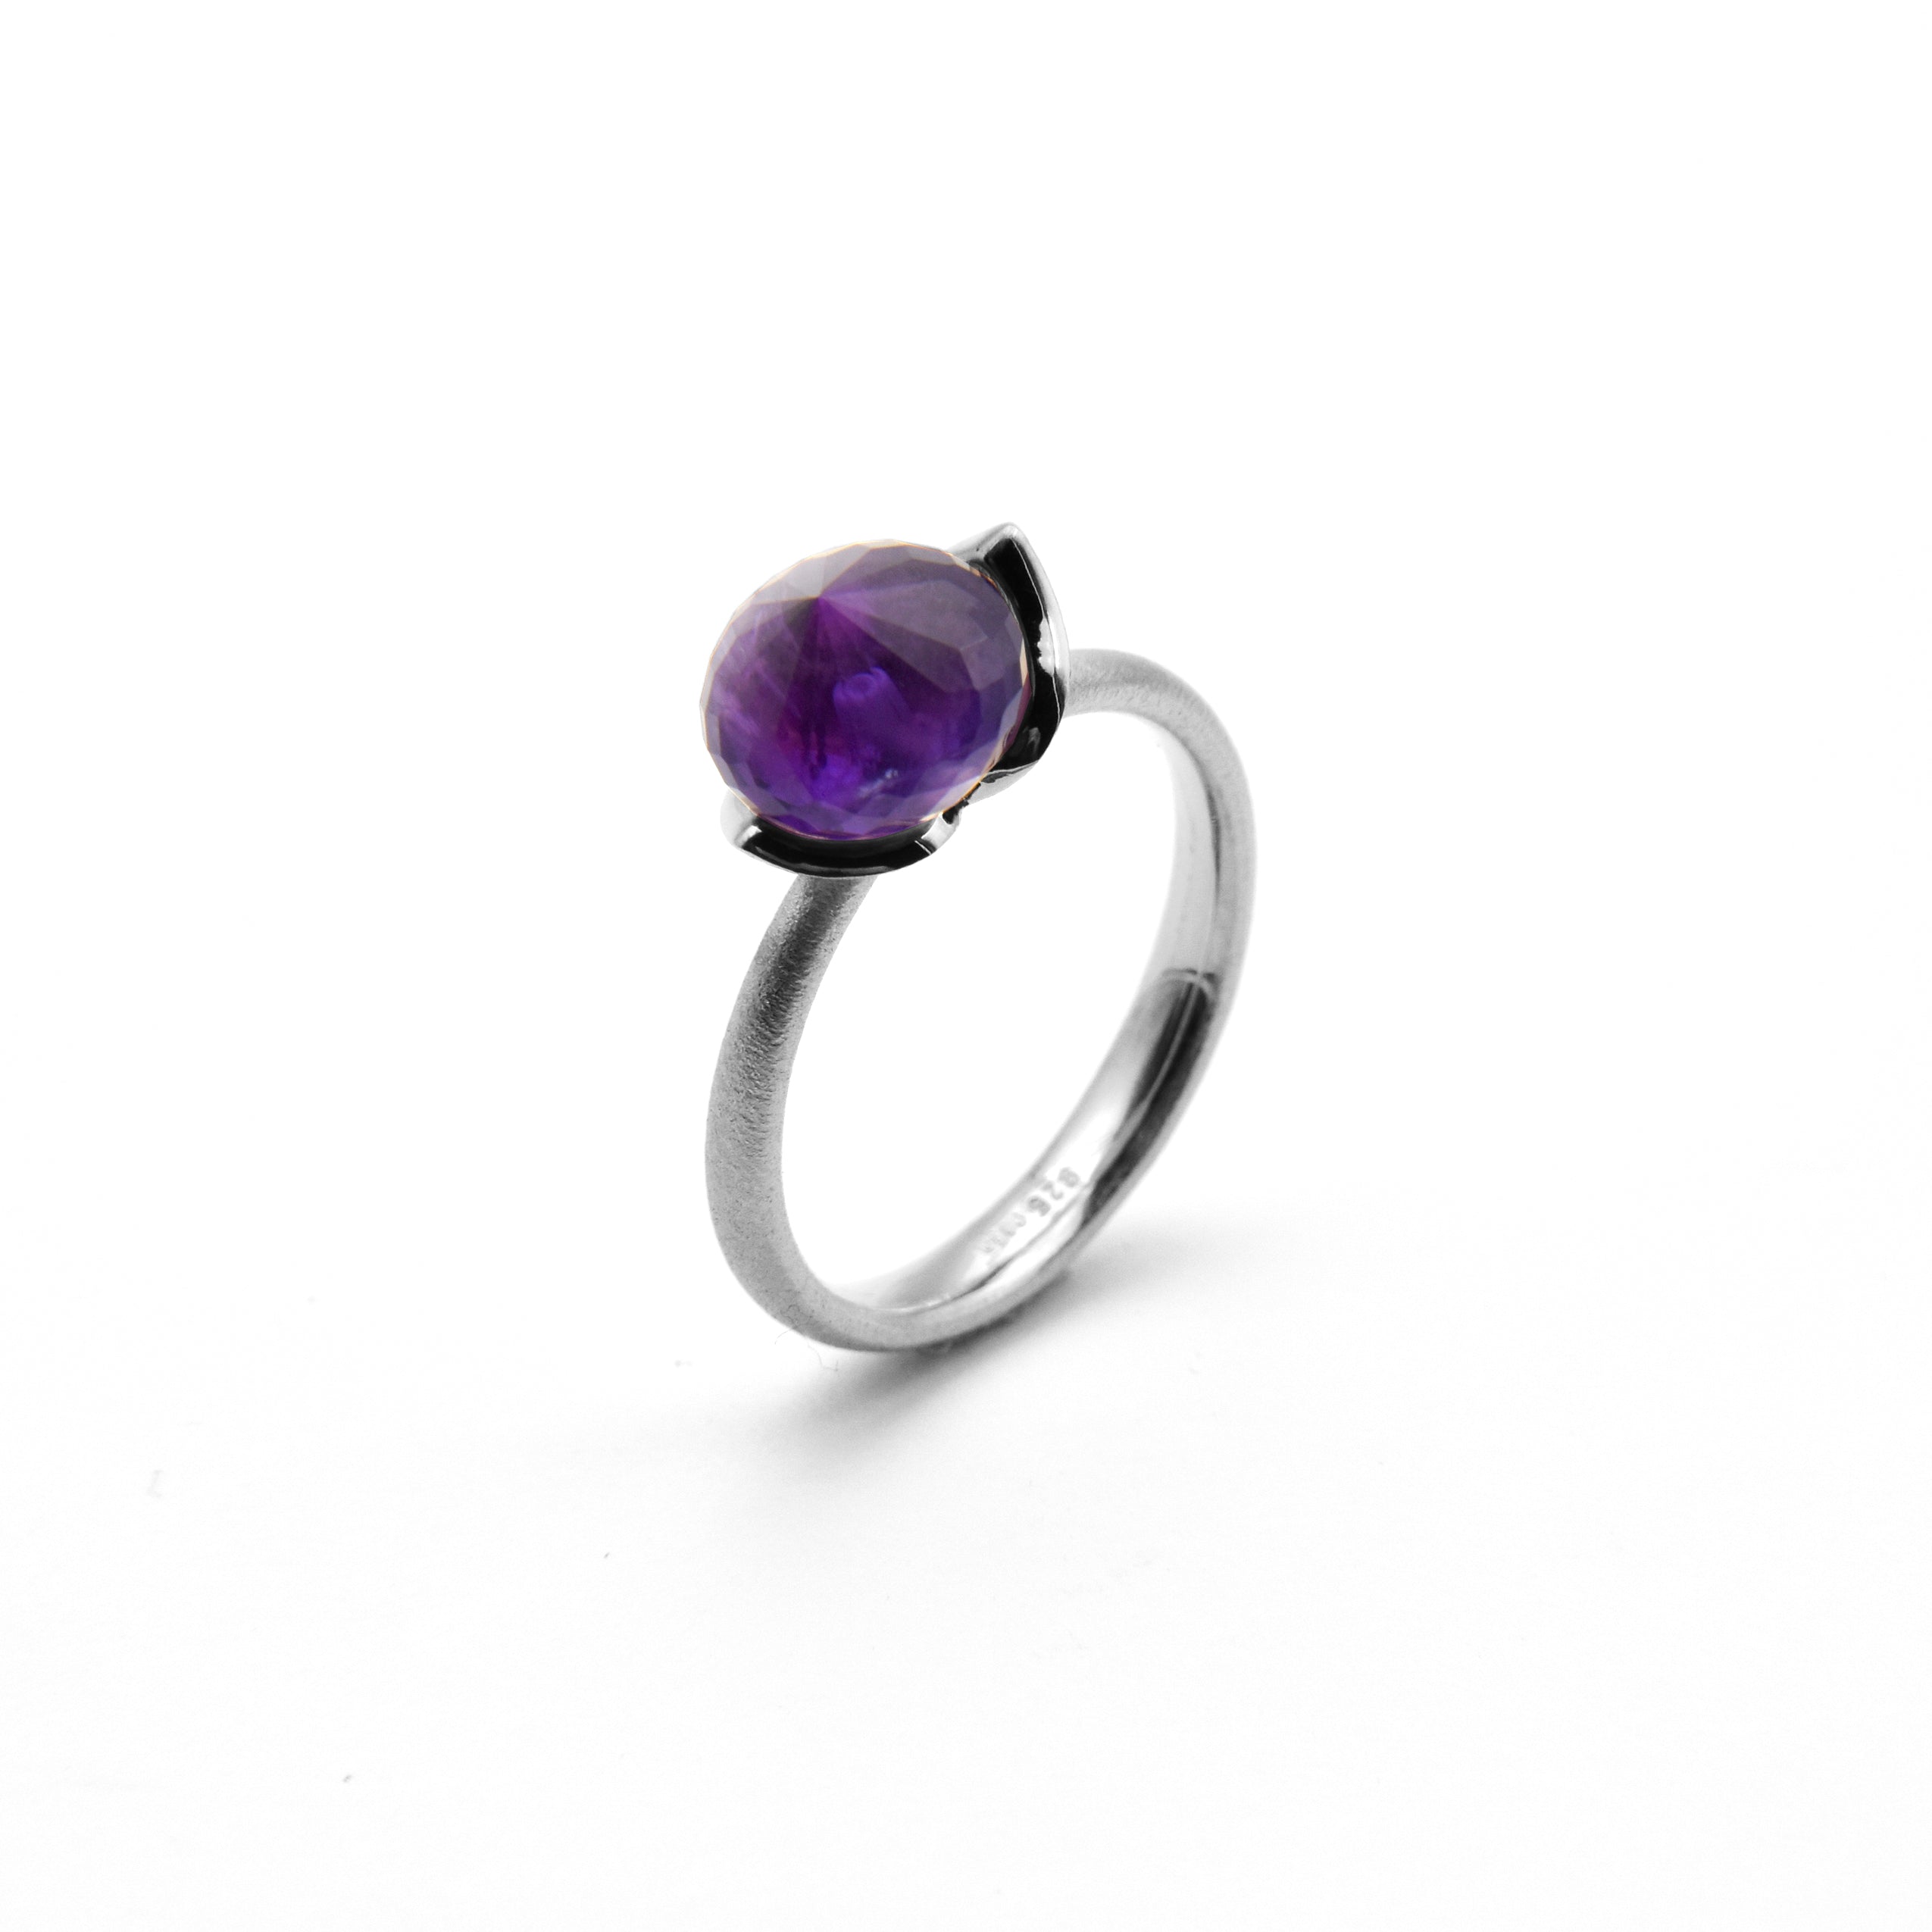 Dolce Ring "smal" mit Amethyst 925/-